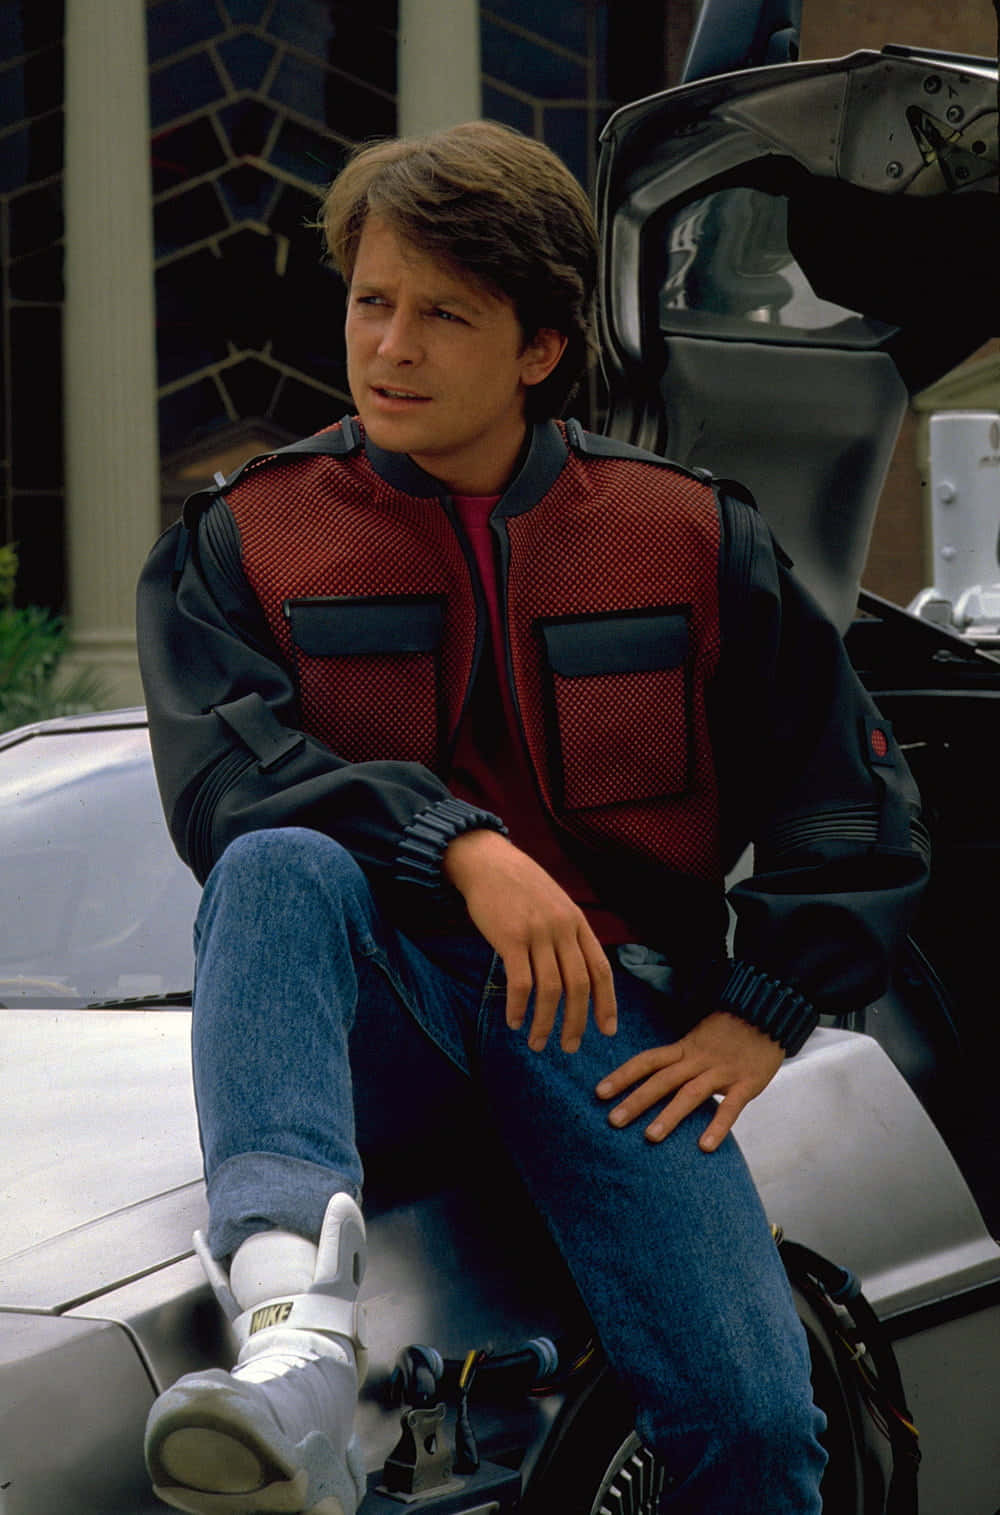 Michael J. Fox - Actor, Author, And Parkinson's Disease Advocate For Over 25 Years'